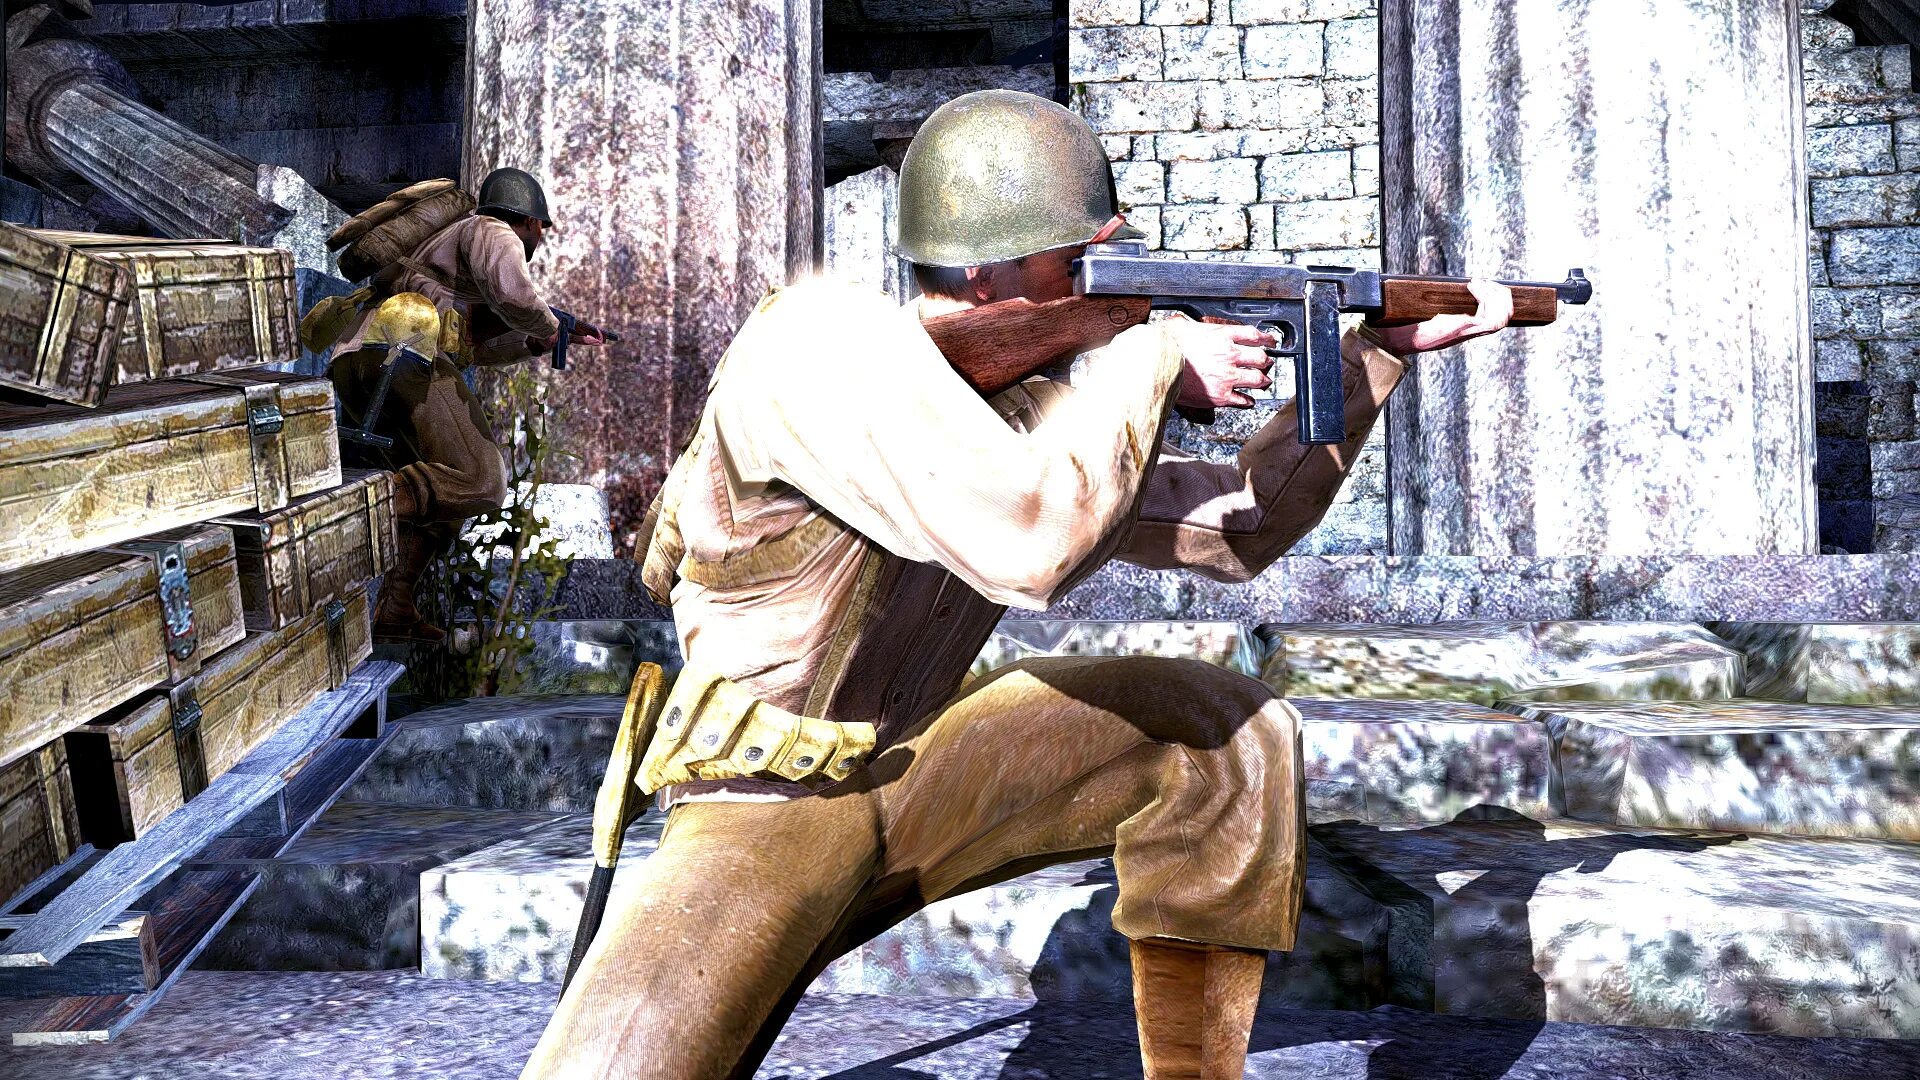 10 20 30 игры. Medal of Honor Airborne 2. Medal of Honor Airborne. Medal of Honor Airborne Waffen SS. Medal of Honor ww2.